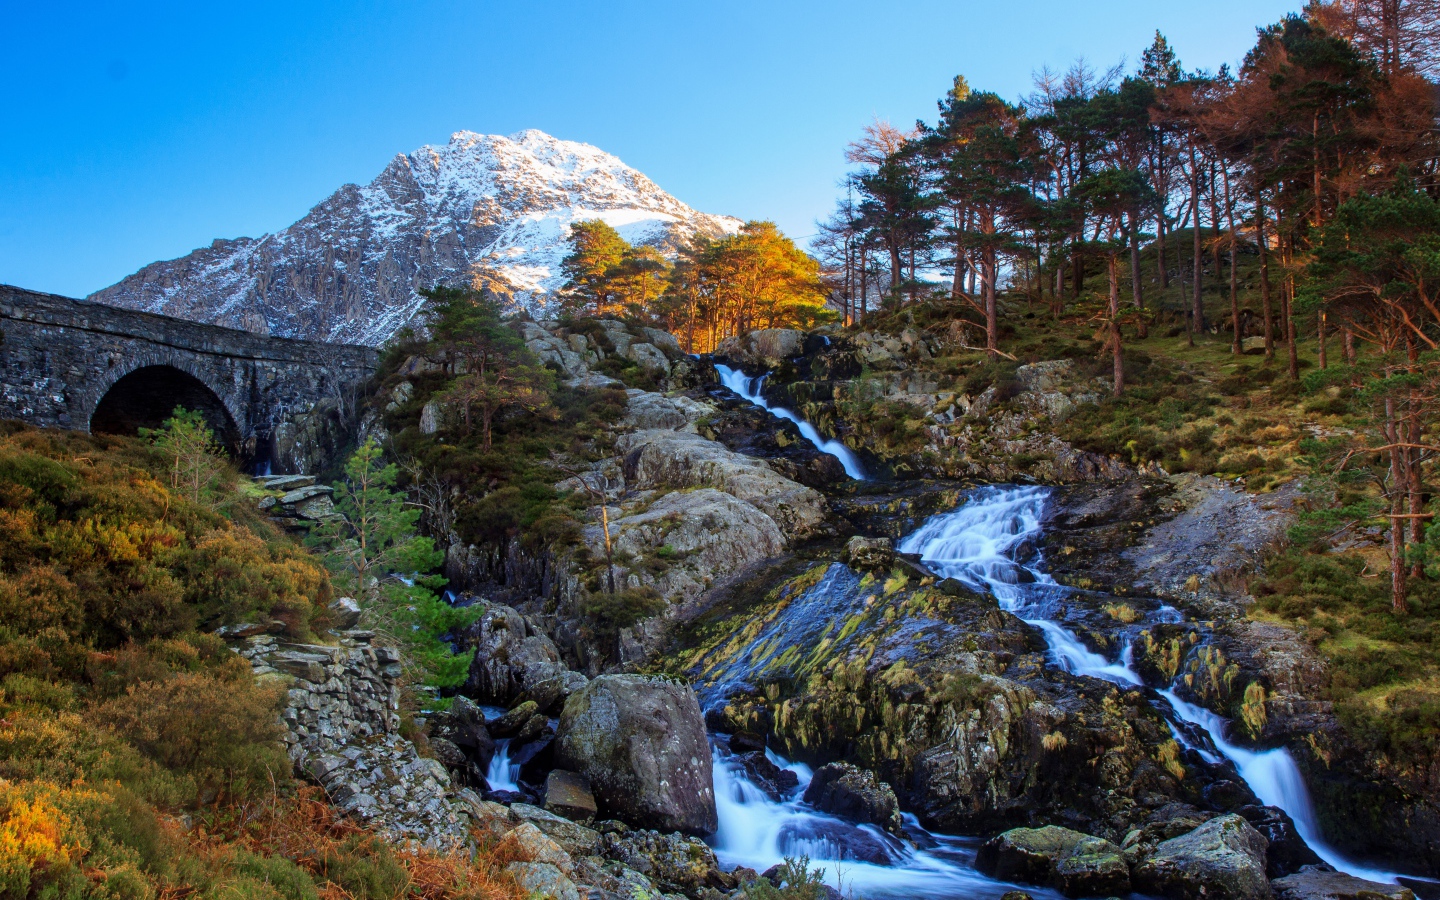 Mountain stream flows down the stones at the coniferous forest